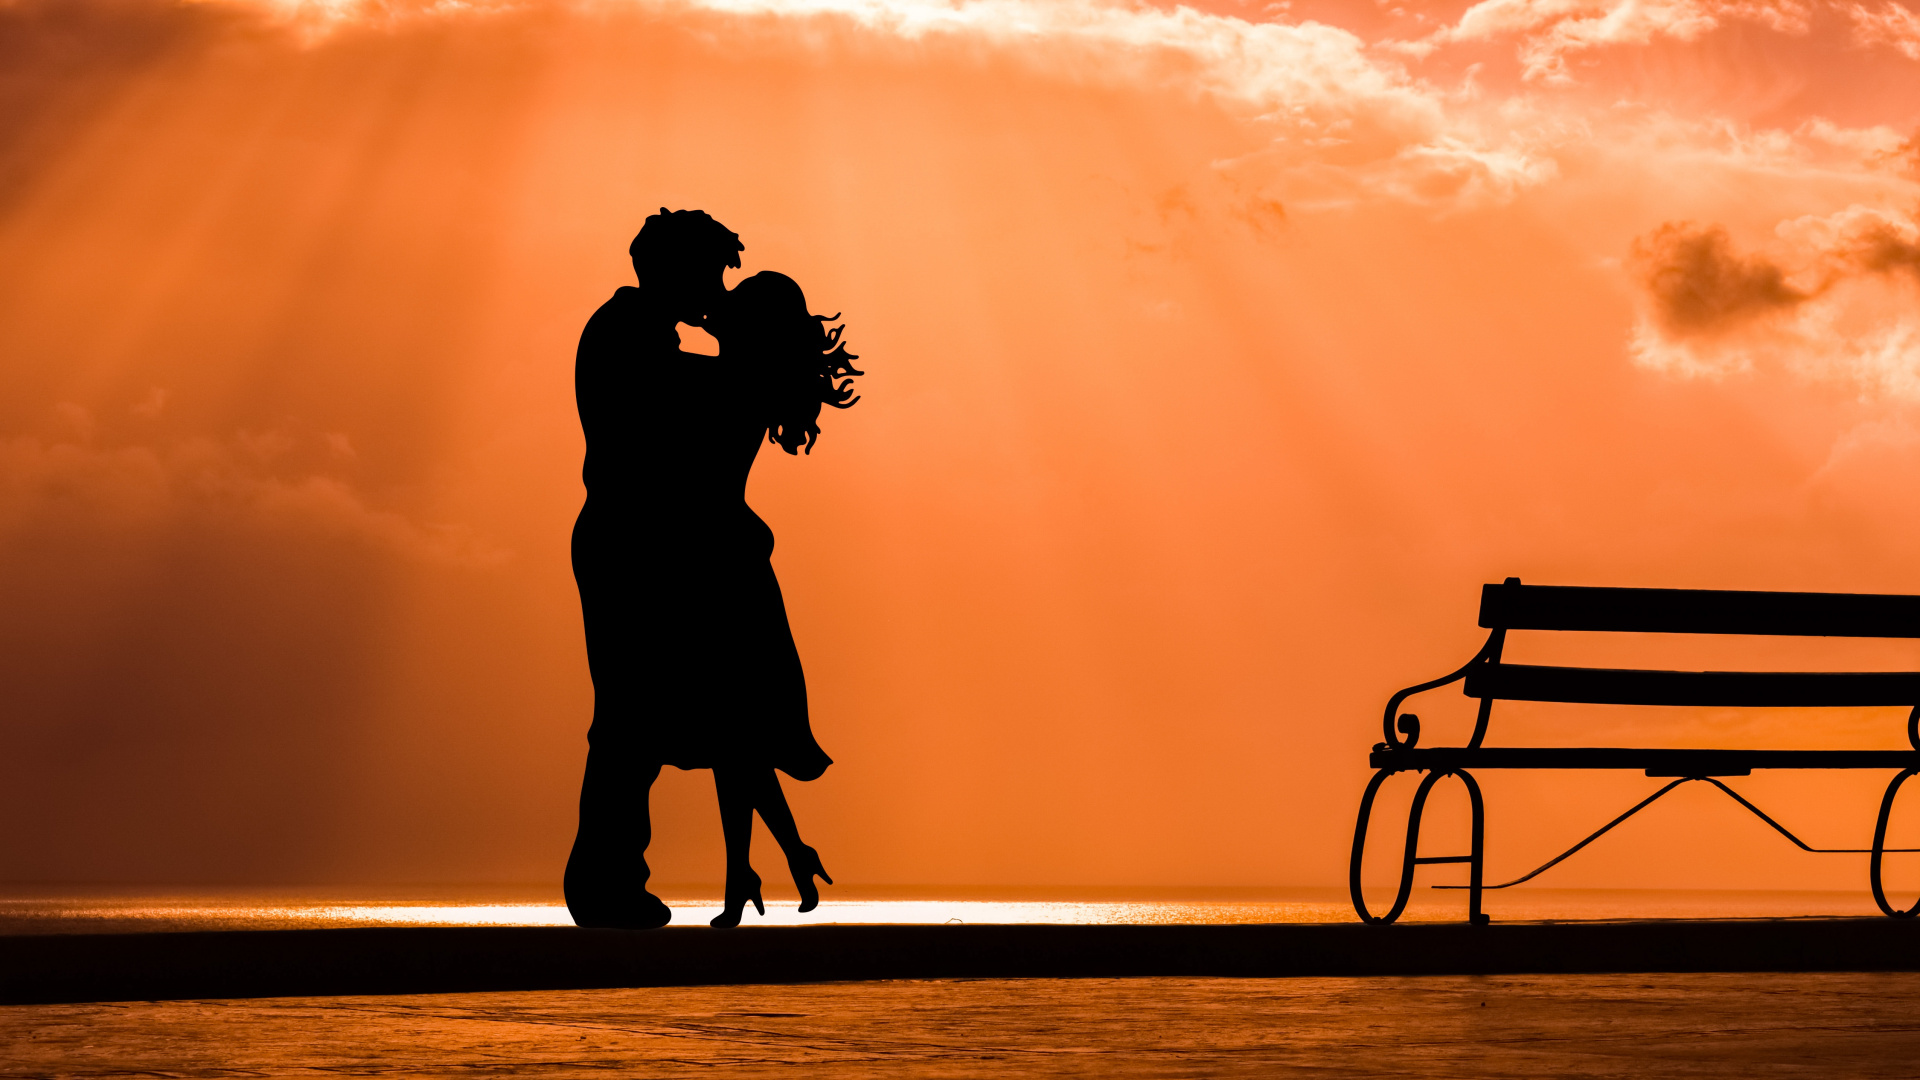 Romance, Kiss, Silhouette, People in Nature, Evening. Wallpaper in 1920x1080 Resolution